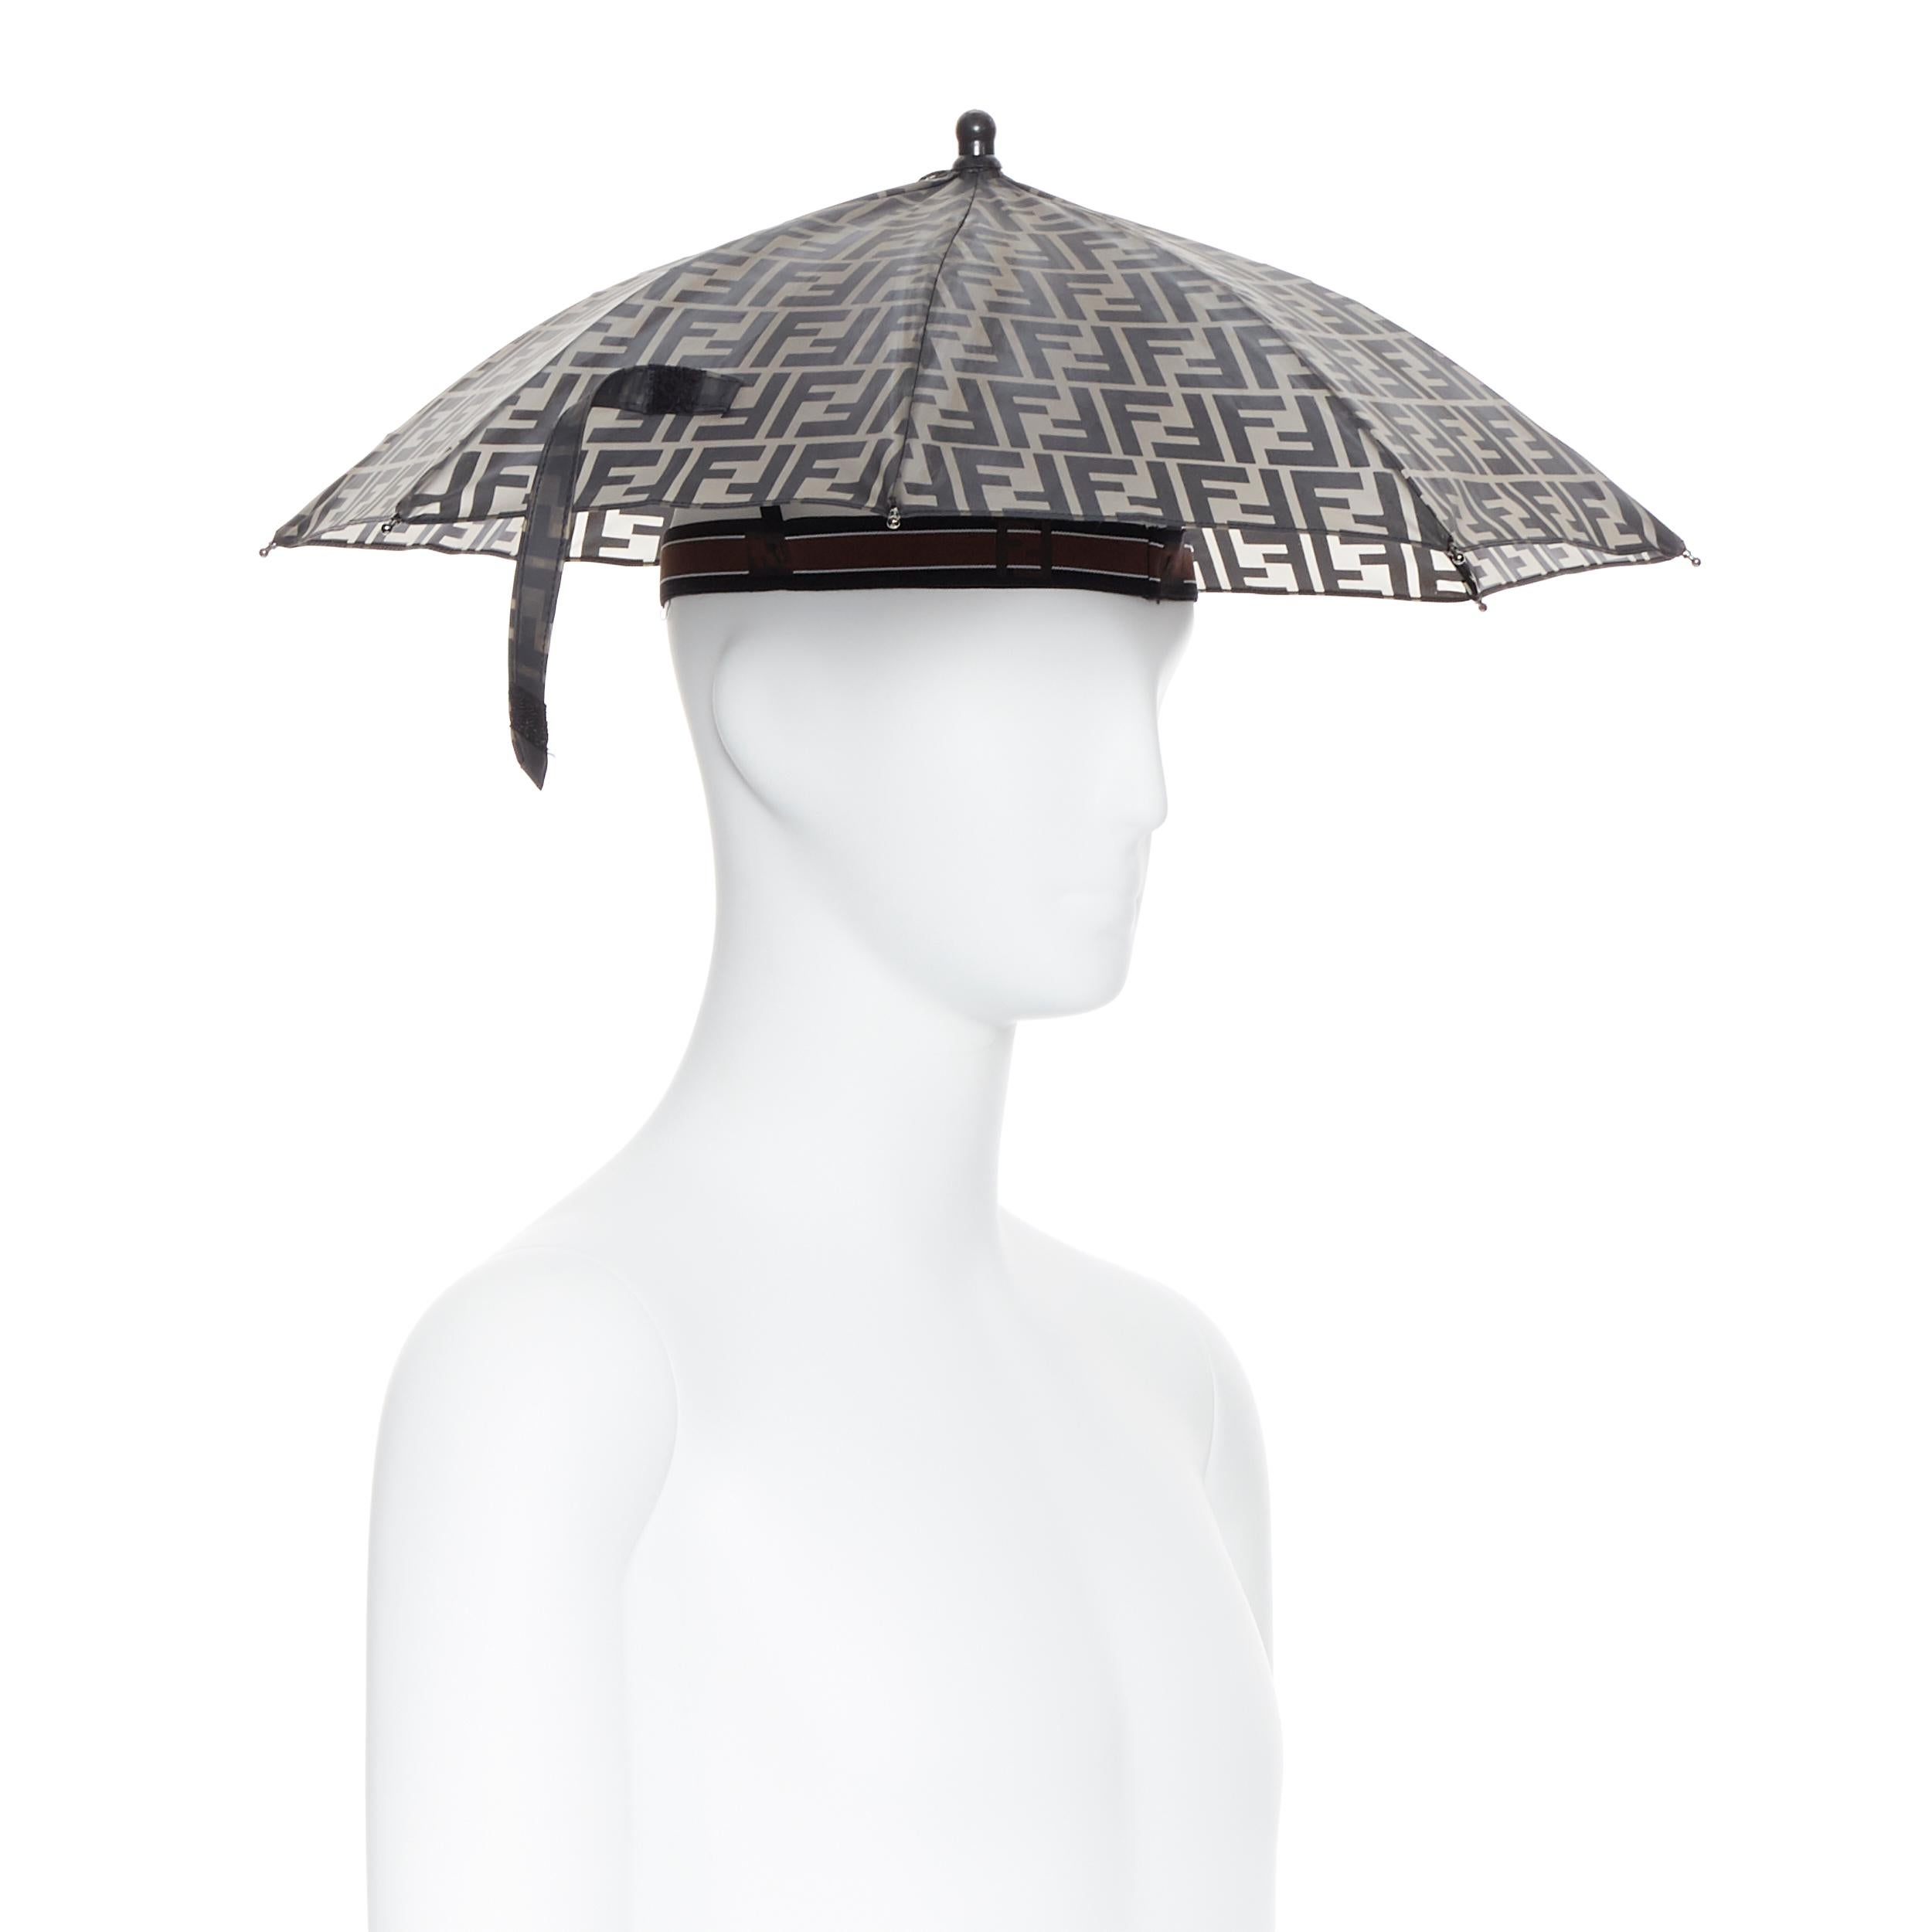 runway FENDI grey FF logo mongram print rubber forever umbrella hat rare
Brand: Fendi
Model Name / Style: Umbrella hat
Material: Rubber
Color: Grey
Pattern: Abstract
Closure: Pull on
Made in: Italy

CONDITION: 
Condition: New without tags.
Comes